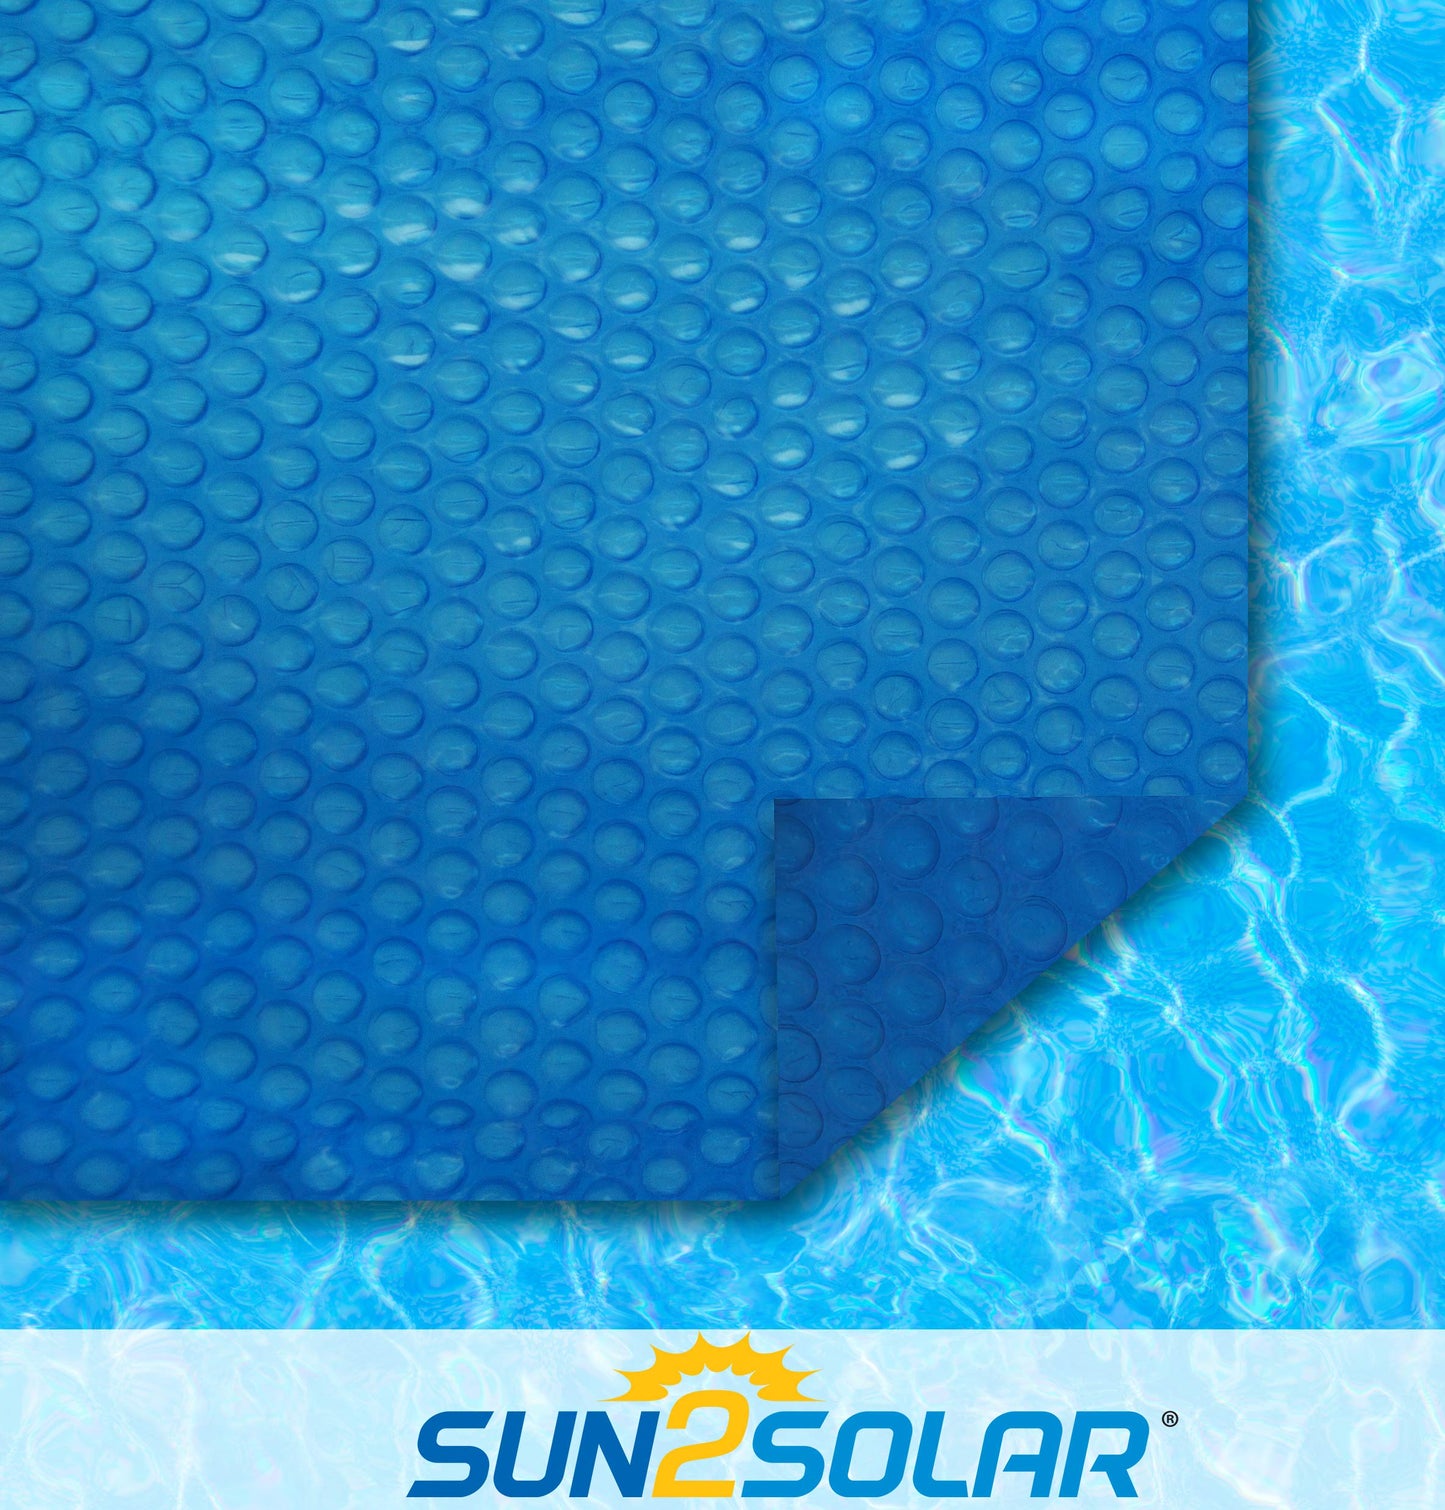 Sun2Solar Blue 15-Foot-by-27-Foot Oval Solar Cover | 800 Series Style